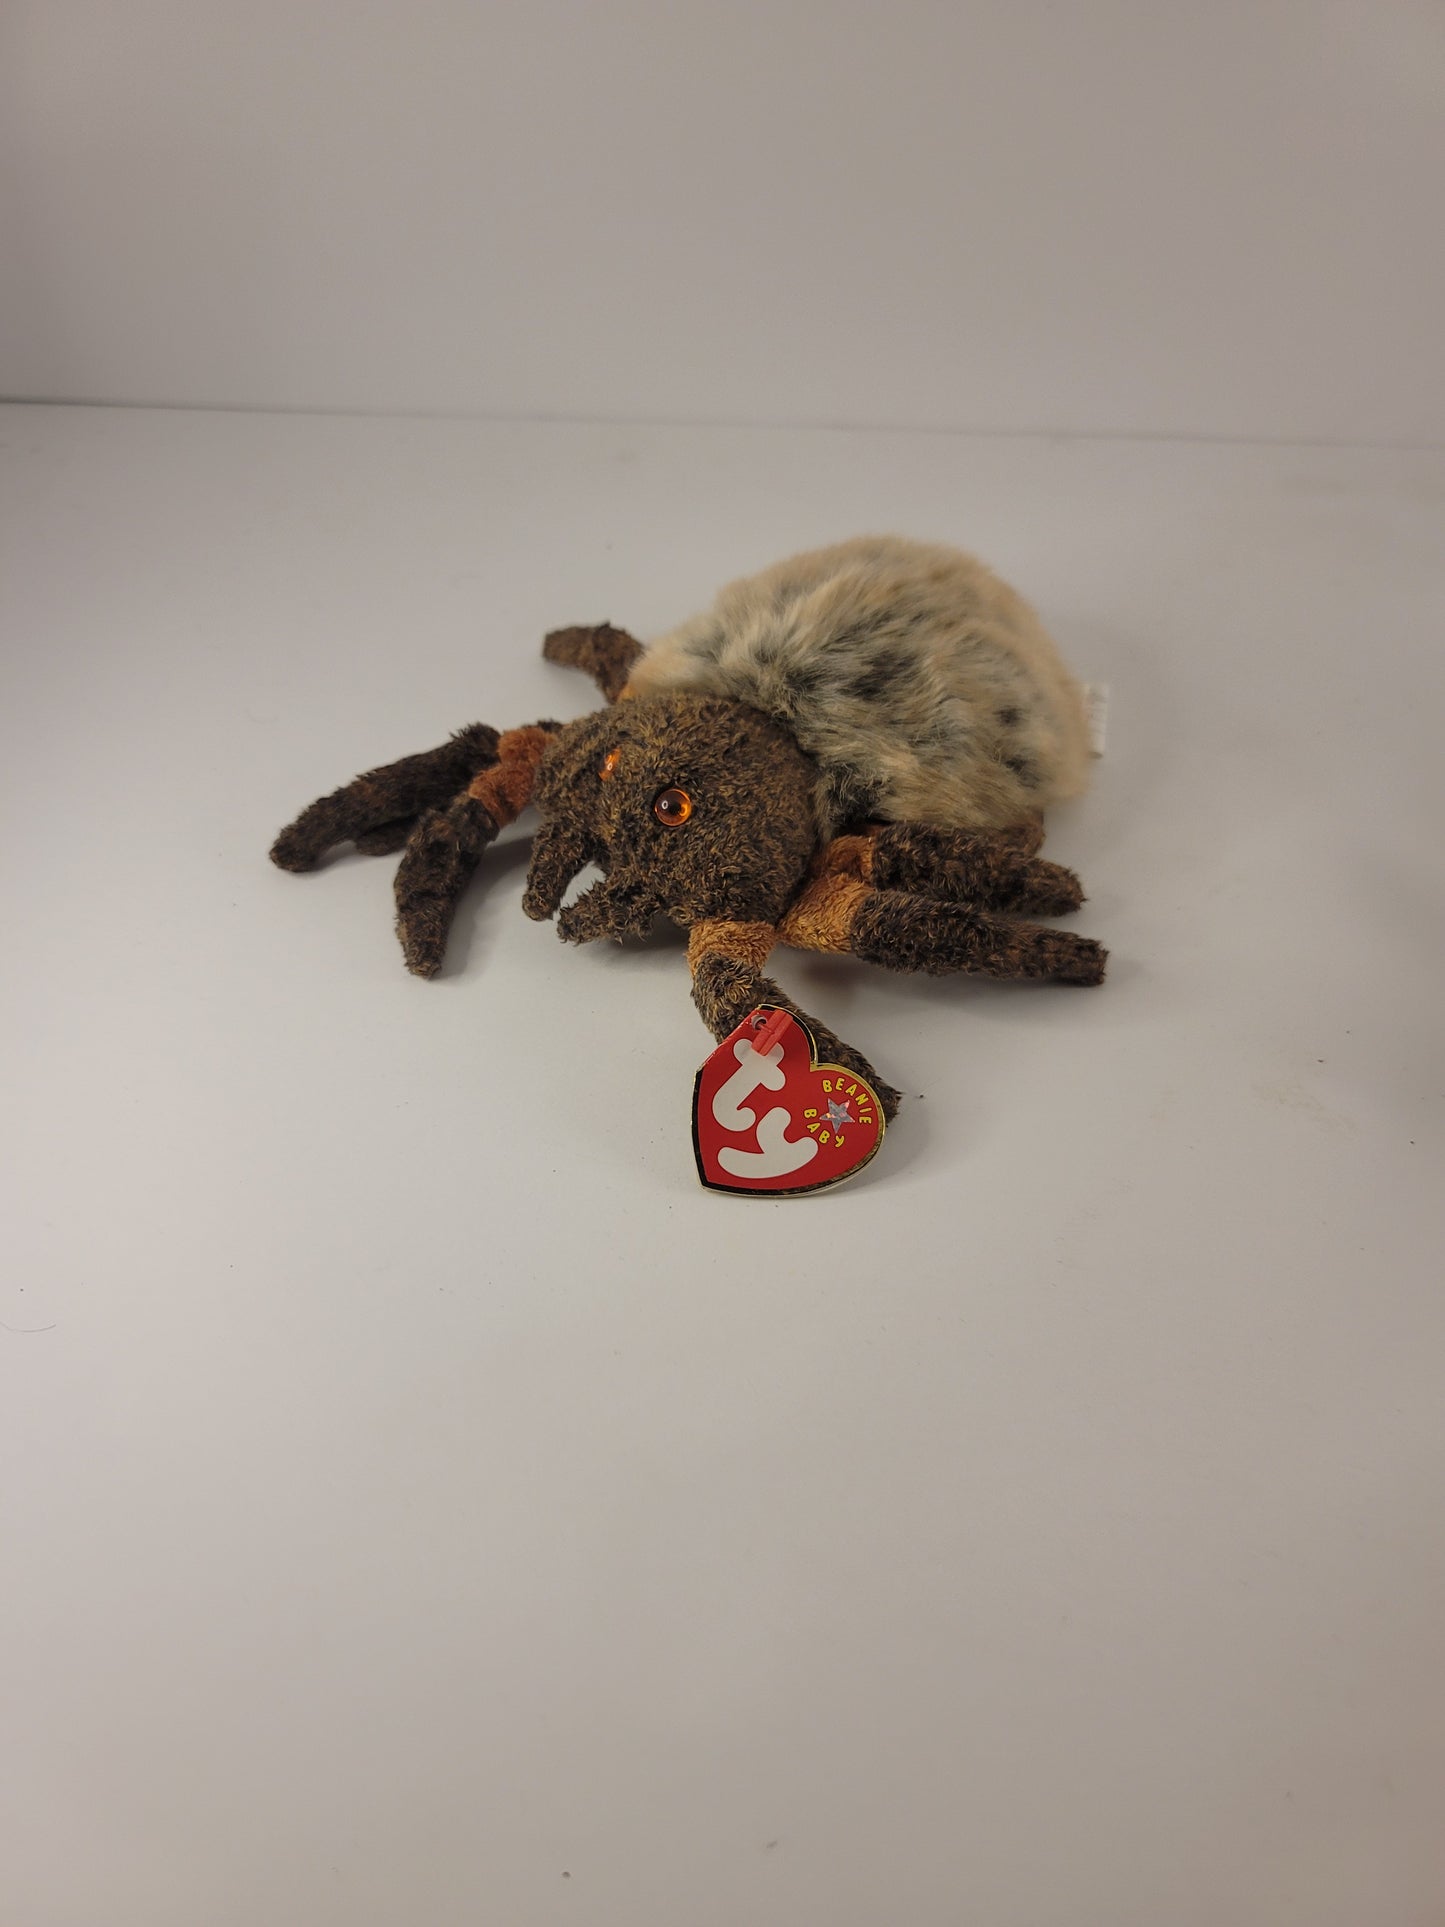 Ty Beanie Baby Lot of 4 - Hairy, Swirly, Buzzie and Scurry